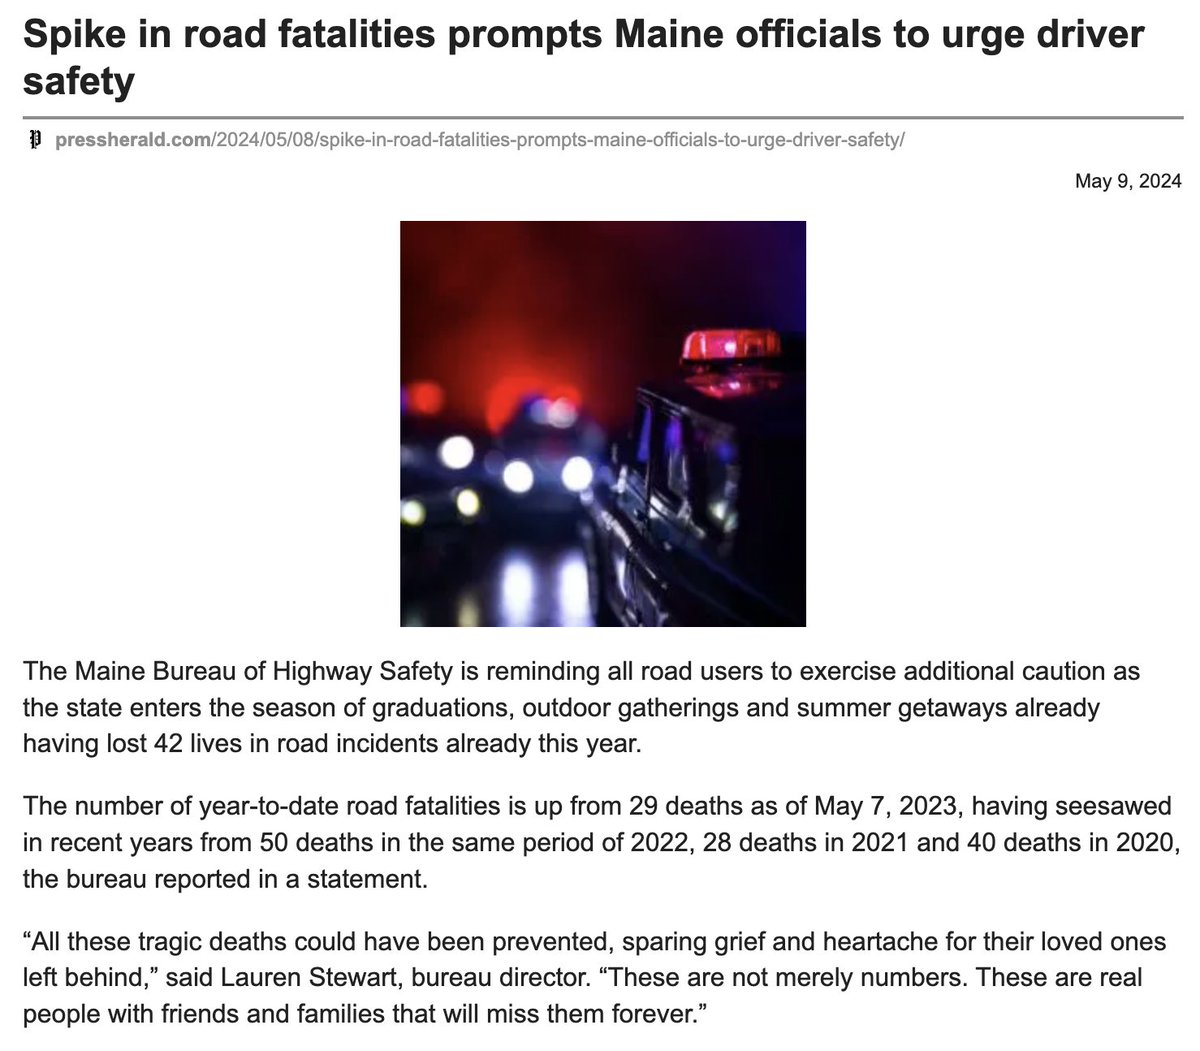 The Press Herald in a nutshell. They'll cover a gov't press release about traffic fatalities, but they won't cover an actual traffic fatality because the man at fault is an illegal alien.